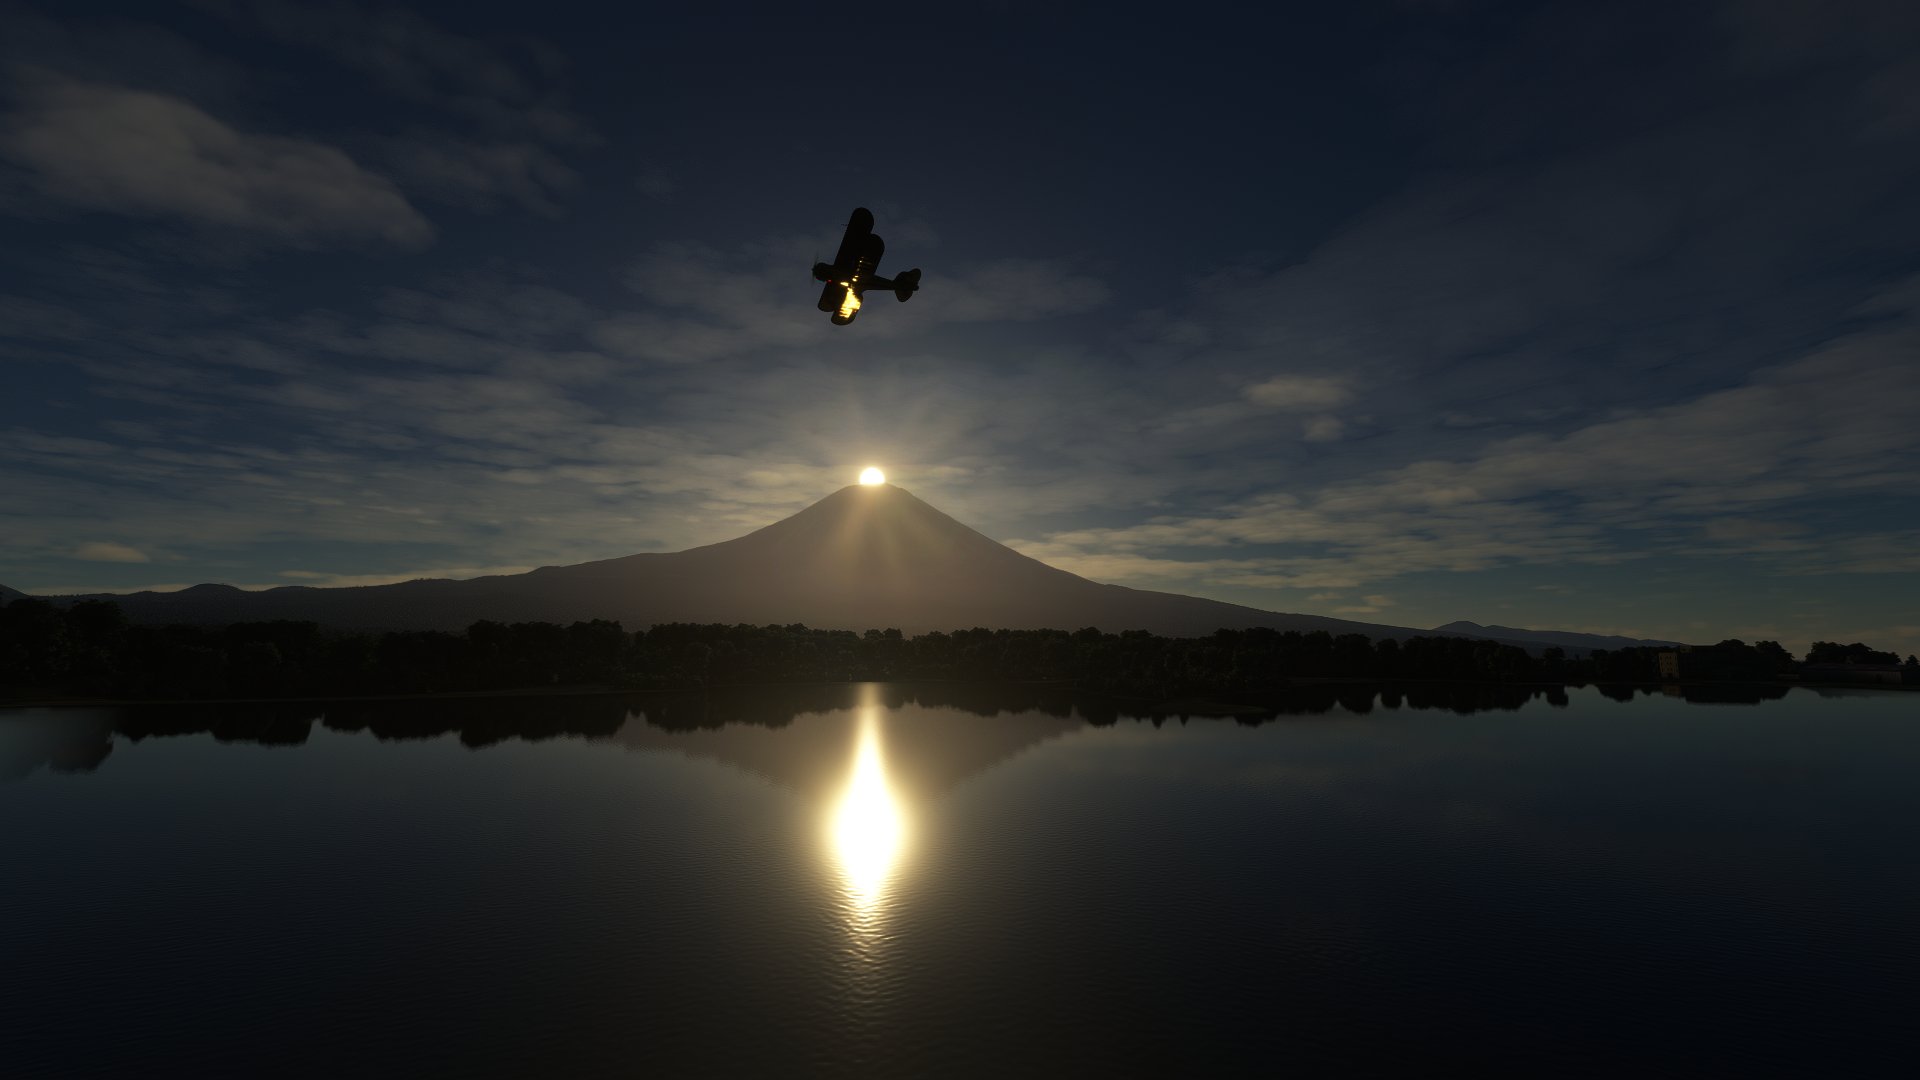 A Pitts Special flies over Mount Fuji in Japan. The sun is rising at the very top of the mountain. The sun is reflected in a lake below the plane.